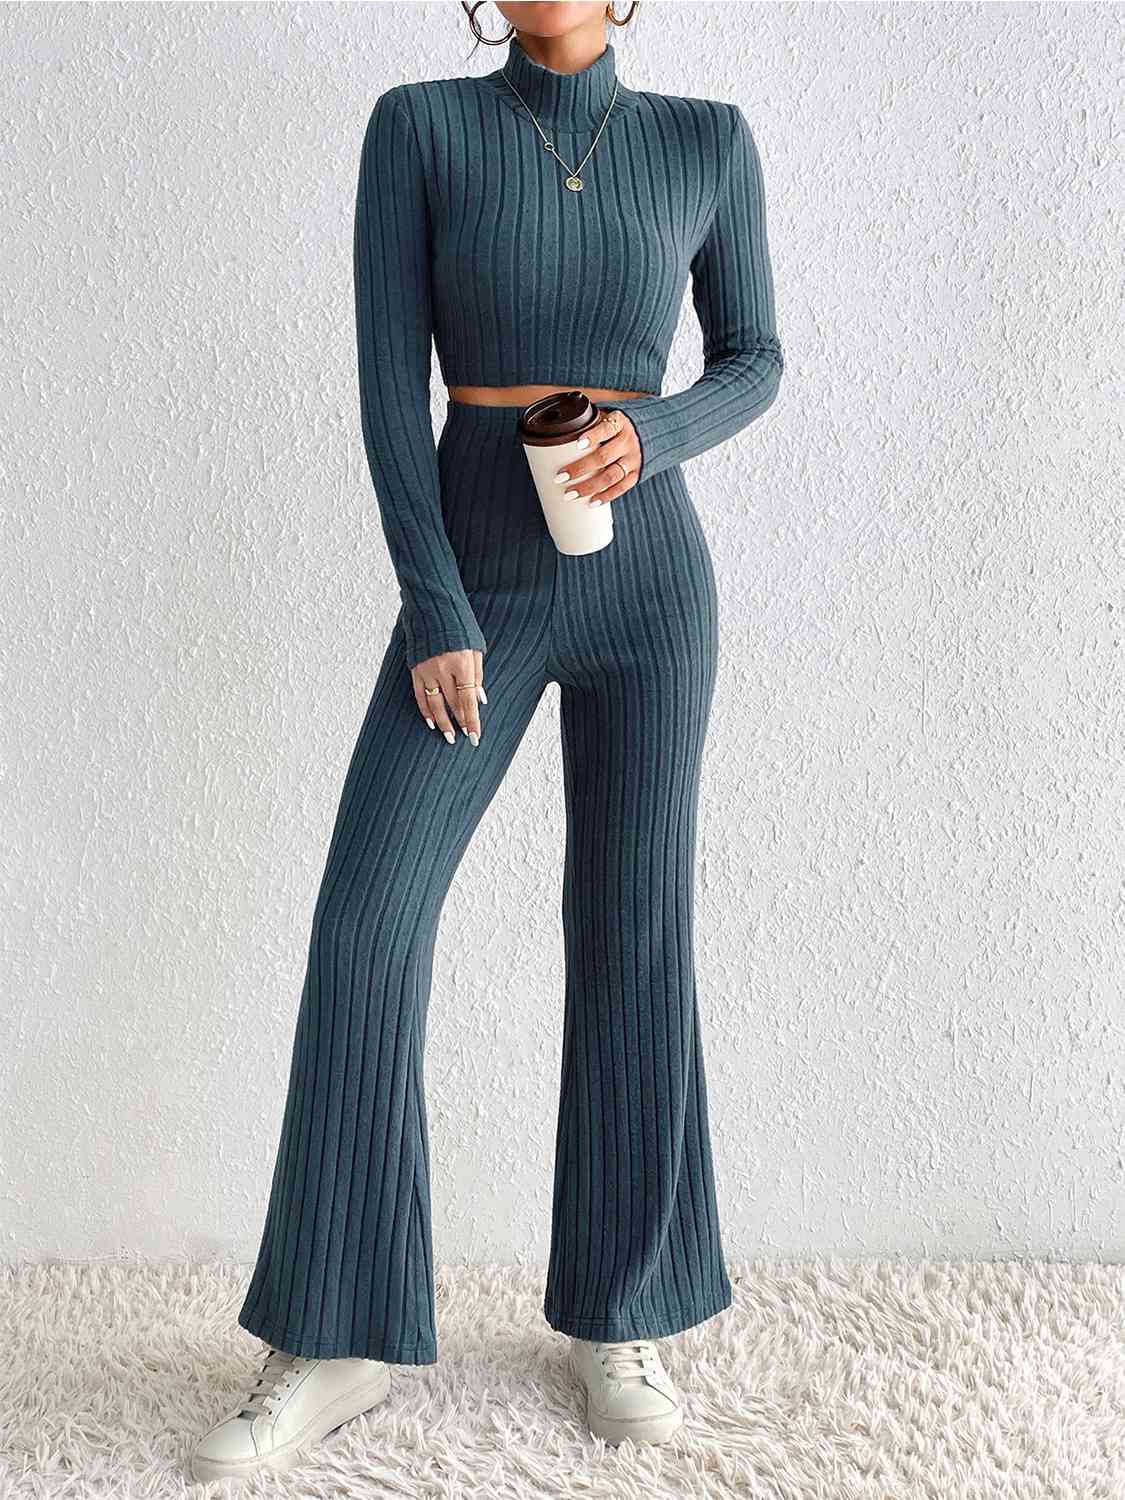 Ribbed Mock Neck Cropped Sweater & High Waist Pants Set Print on any thing USA/STOD clothes